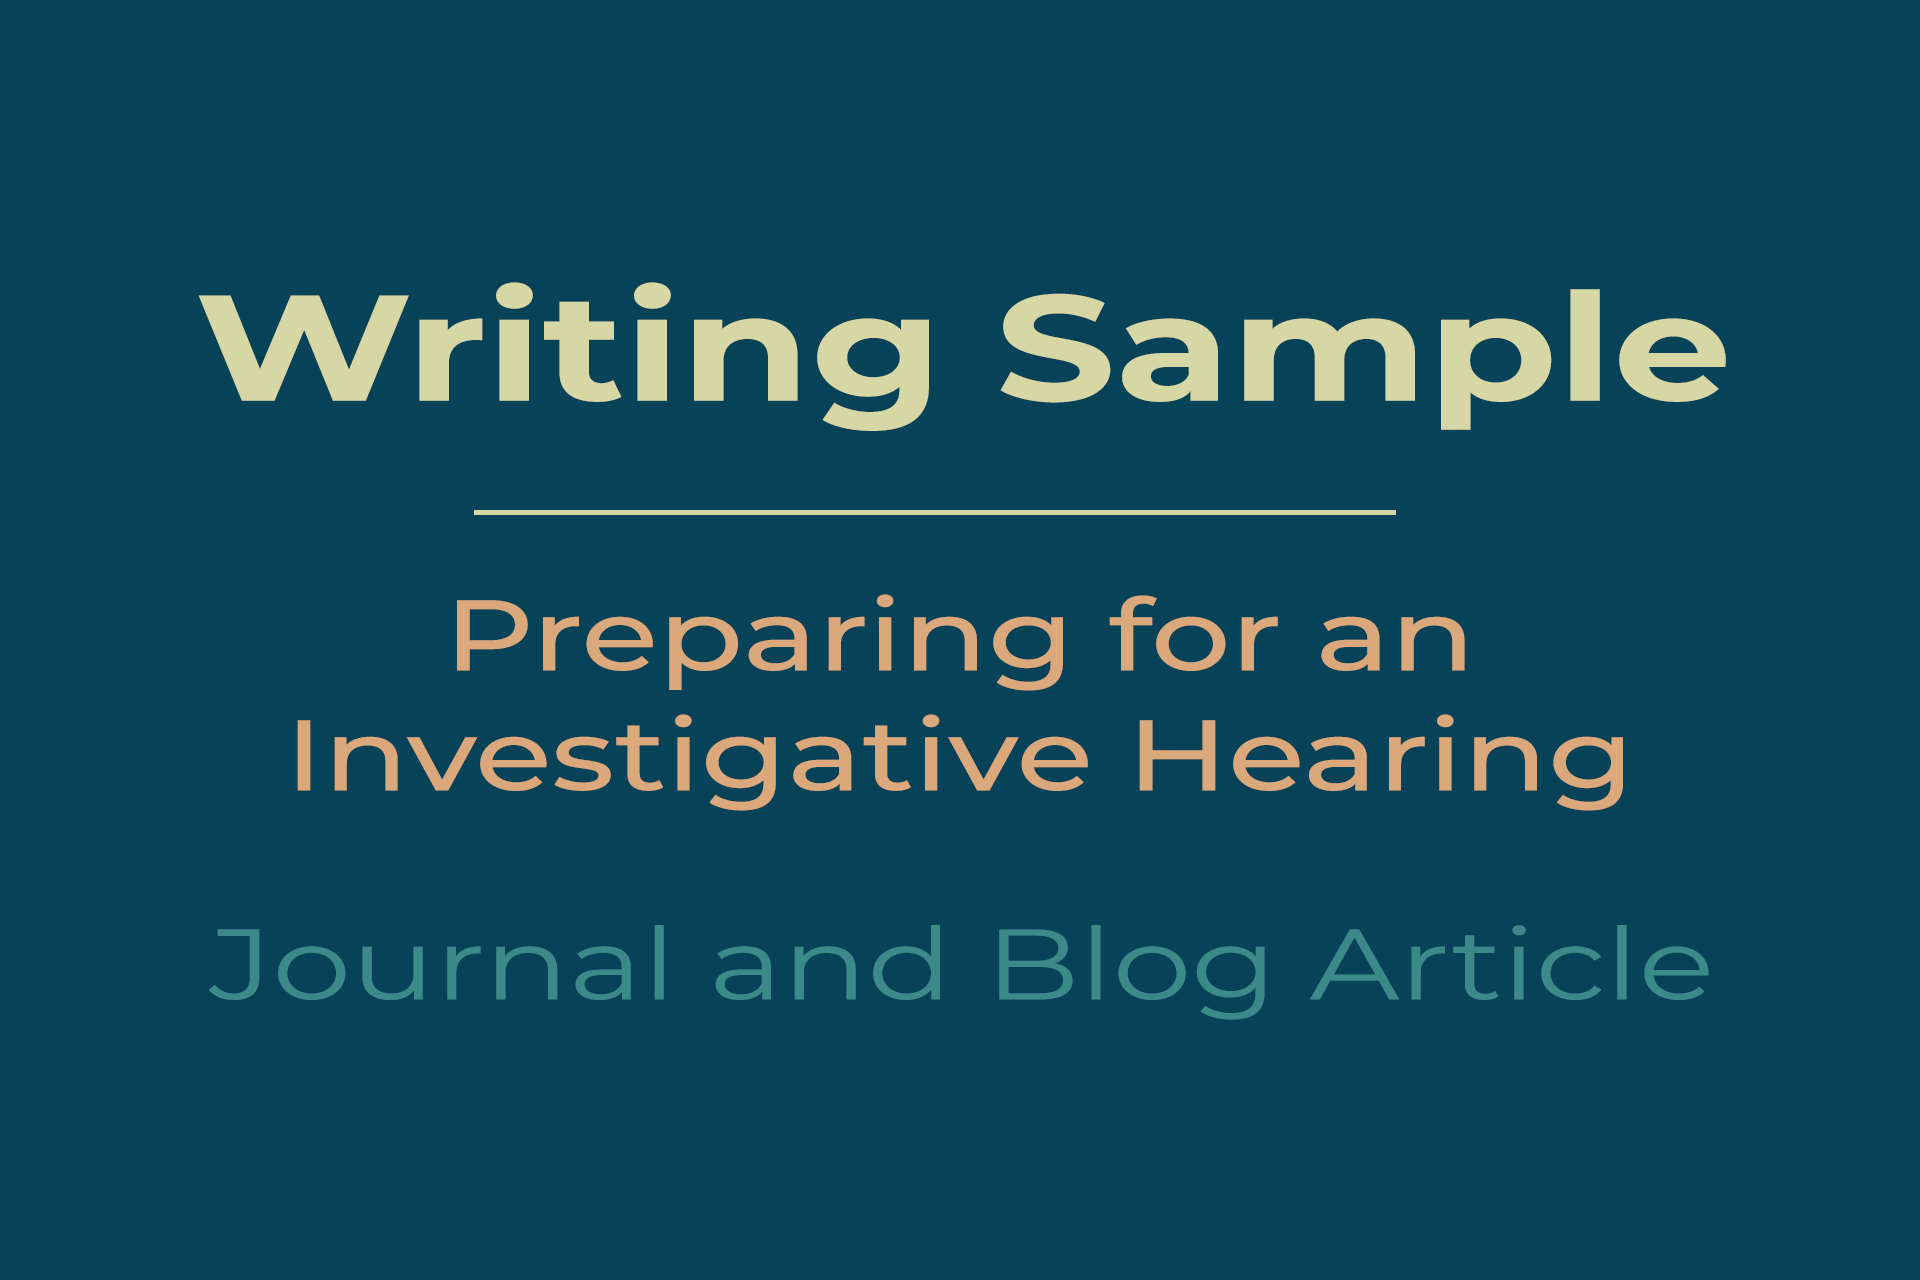 Preparing for an Investigative Hearing